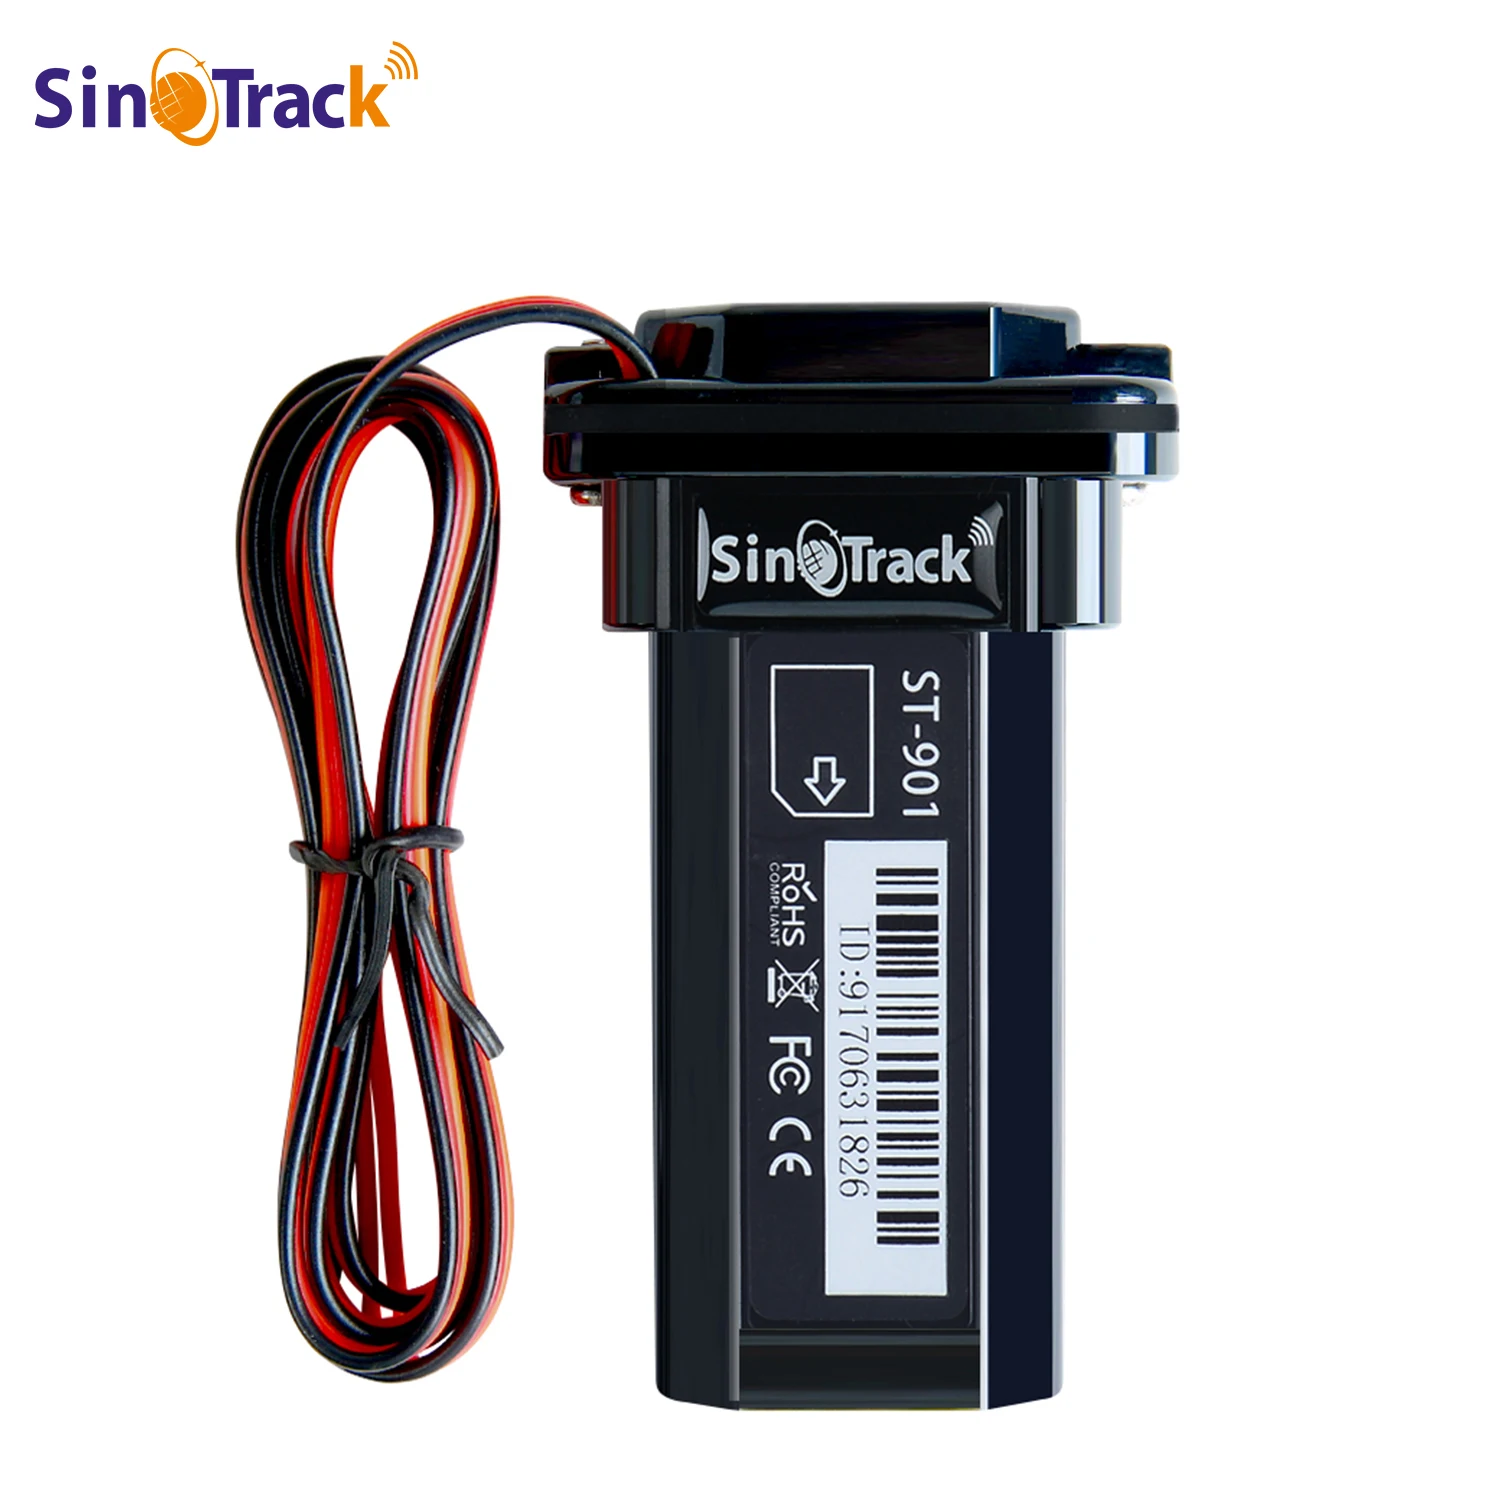 Best Cheap China GPS Tracker Vehicle Tracking Device Waterproof motorcycle Car Mini GPS GSM SMS locator with real time tracking